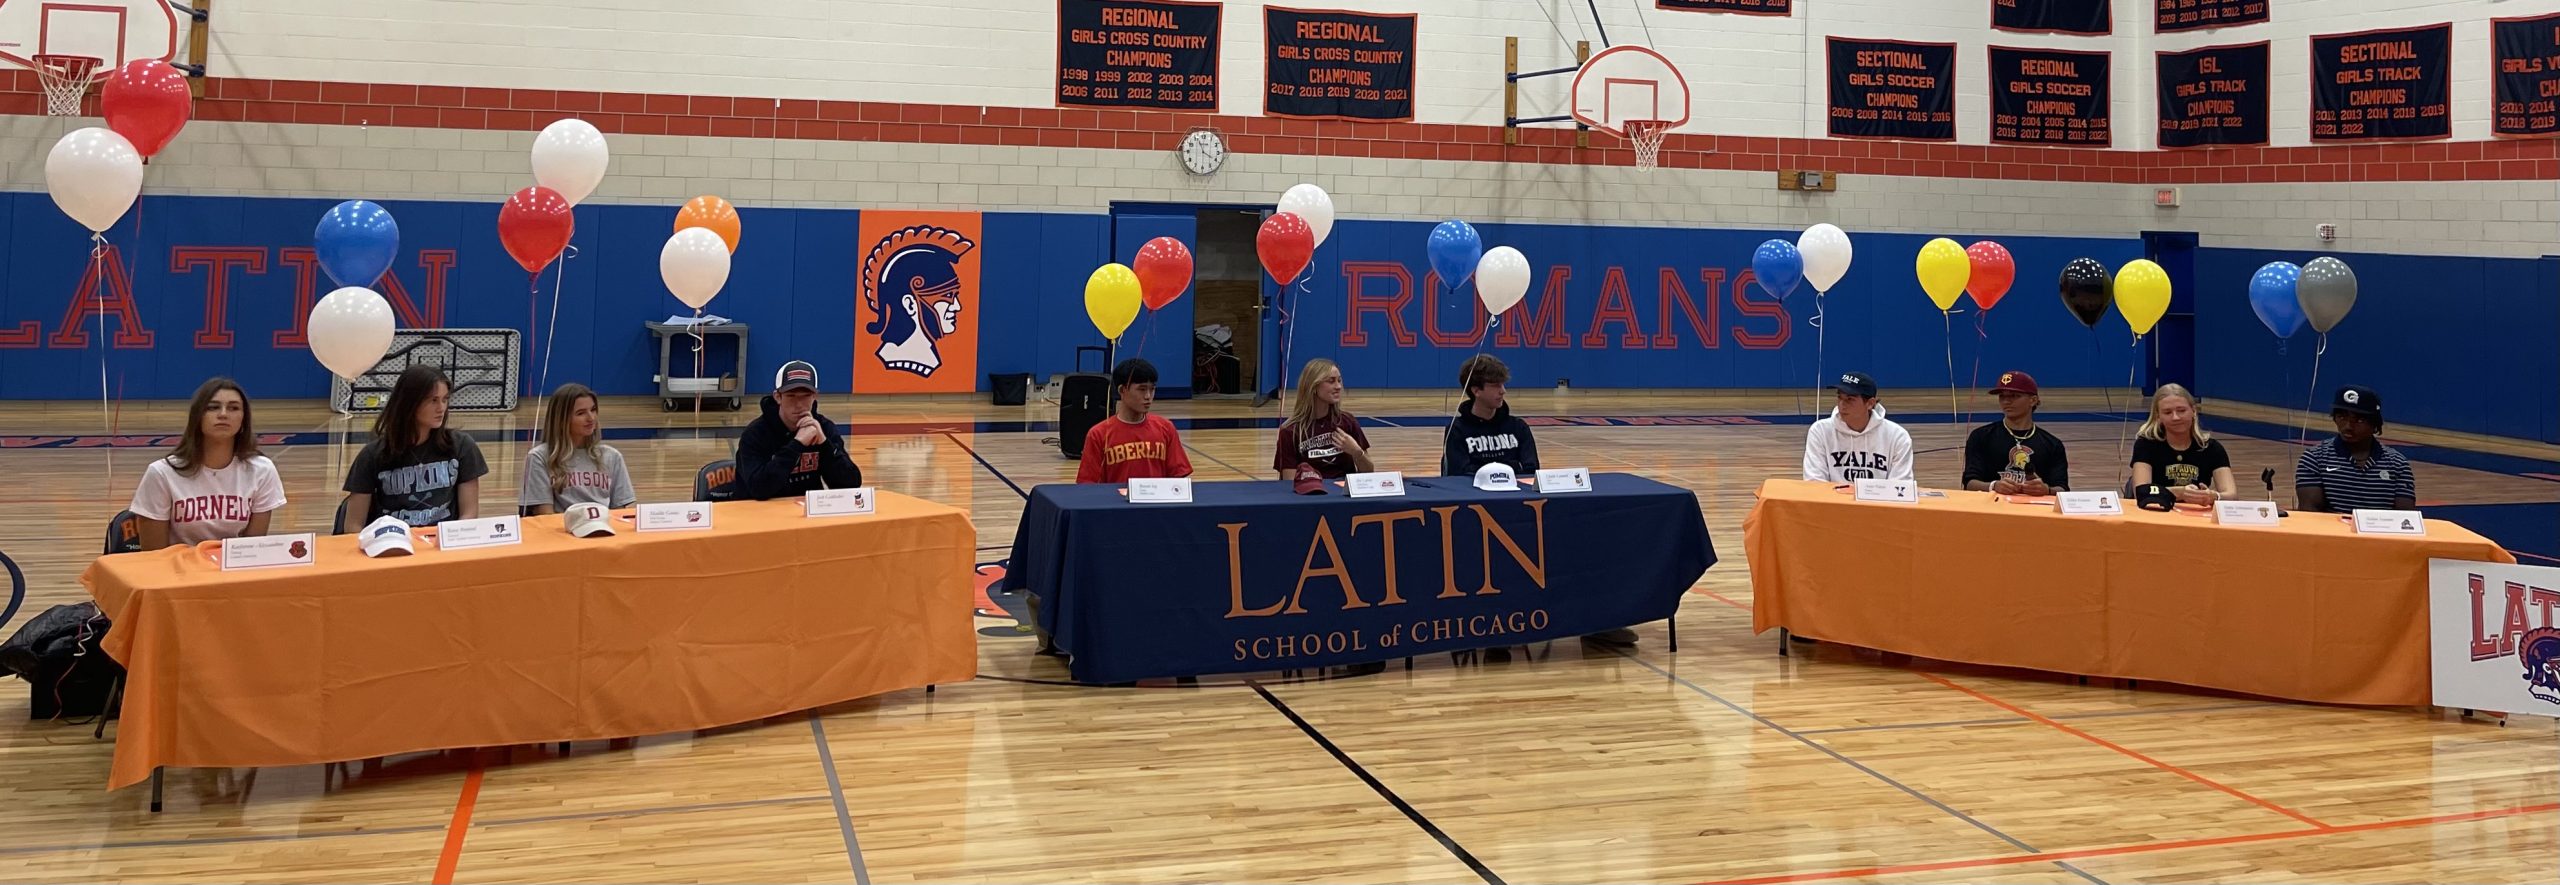 Senior athletes gather in Latins Field Gym to commemorate their college athletic commitments.